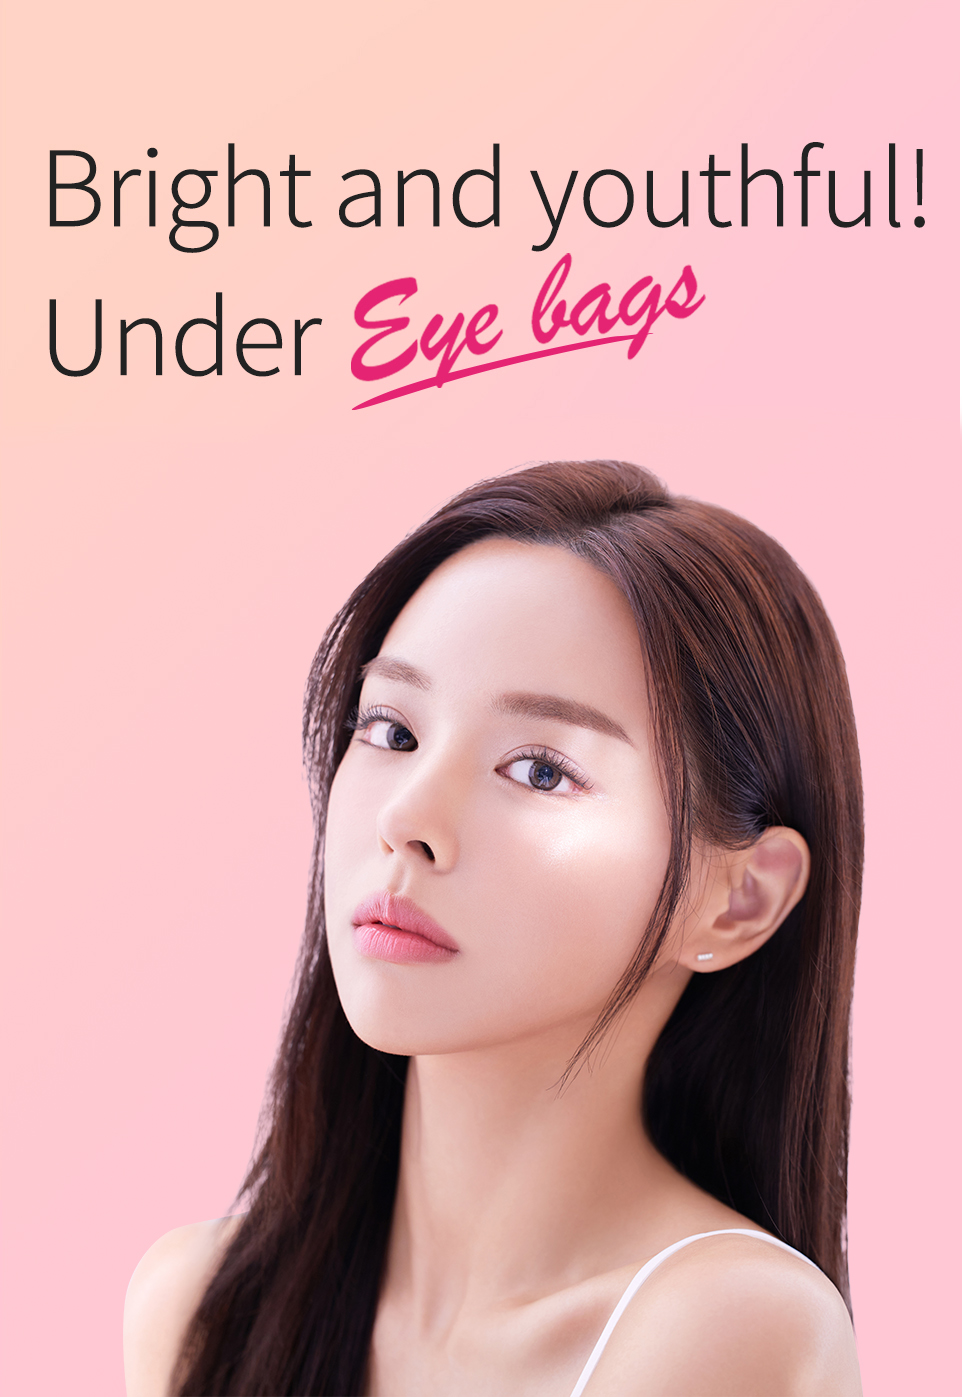 Bright and youthful! Under eye bags